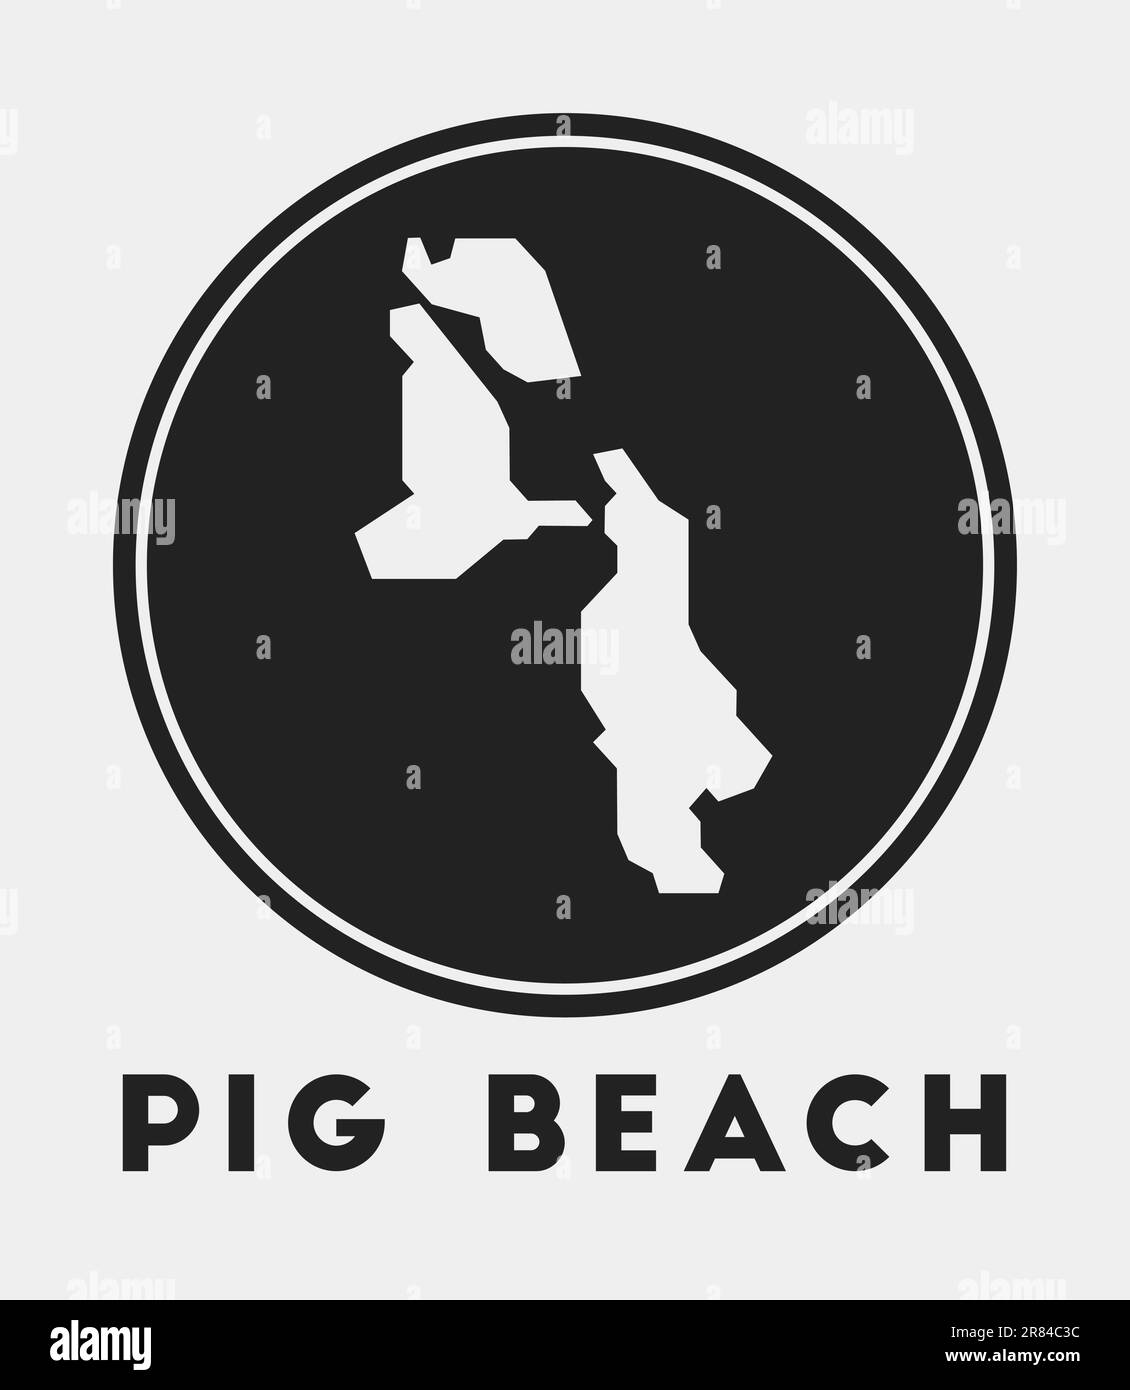 Pig Beach icon. Round logo with island map and title. Stylish Pig Beach badge with map. Vector illustration. Stock Vector